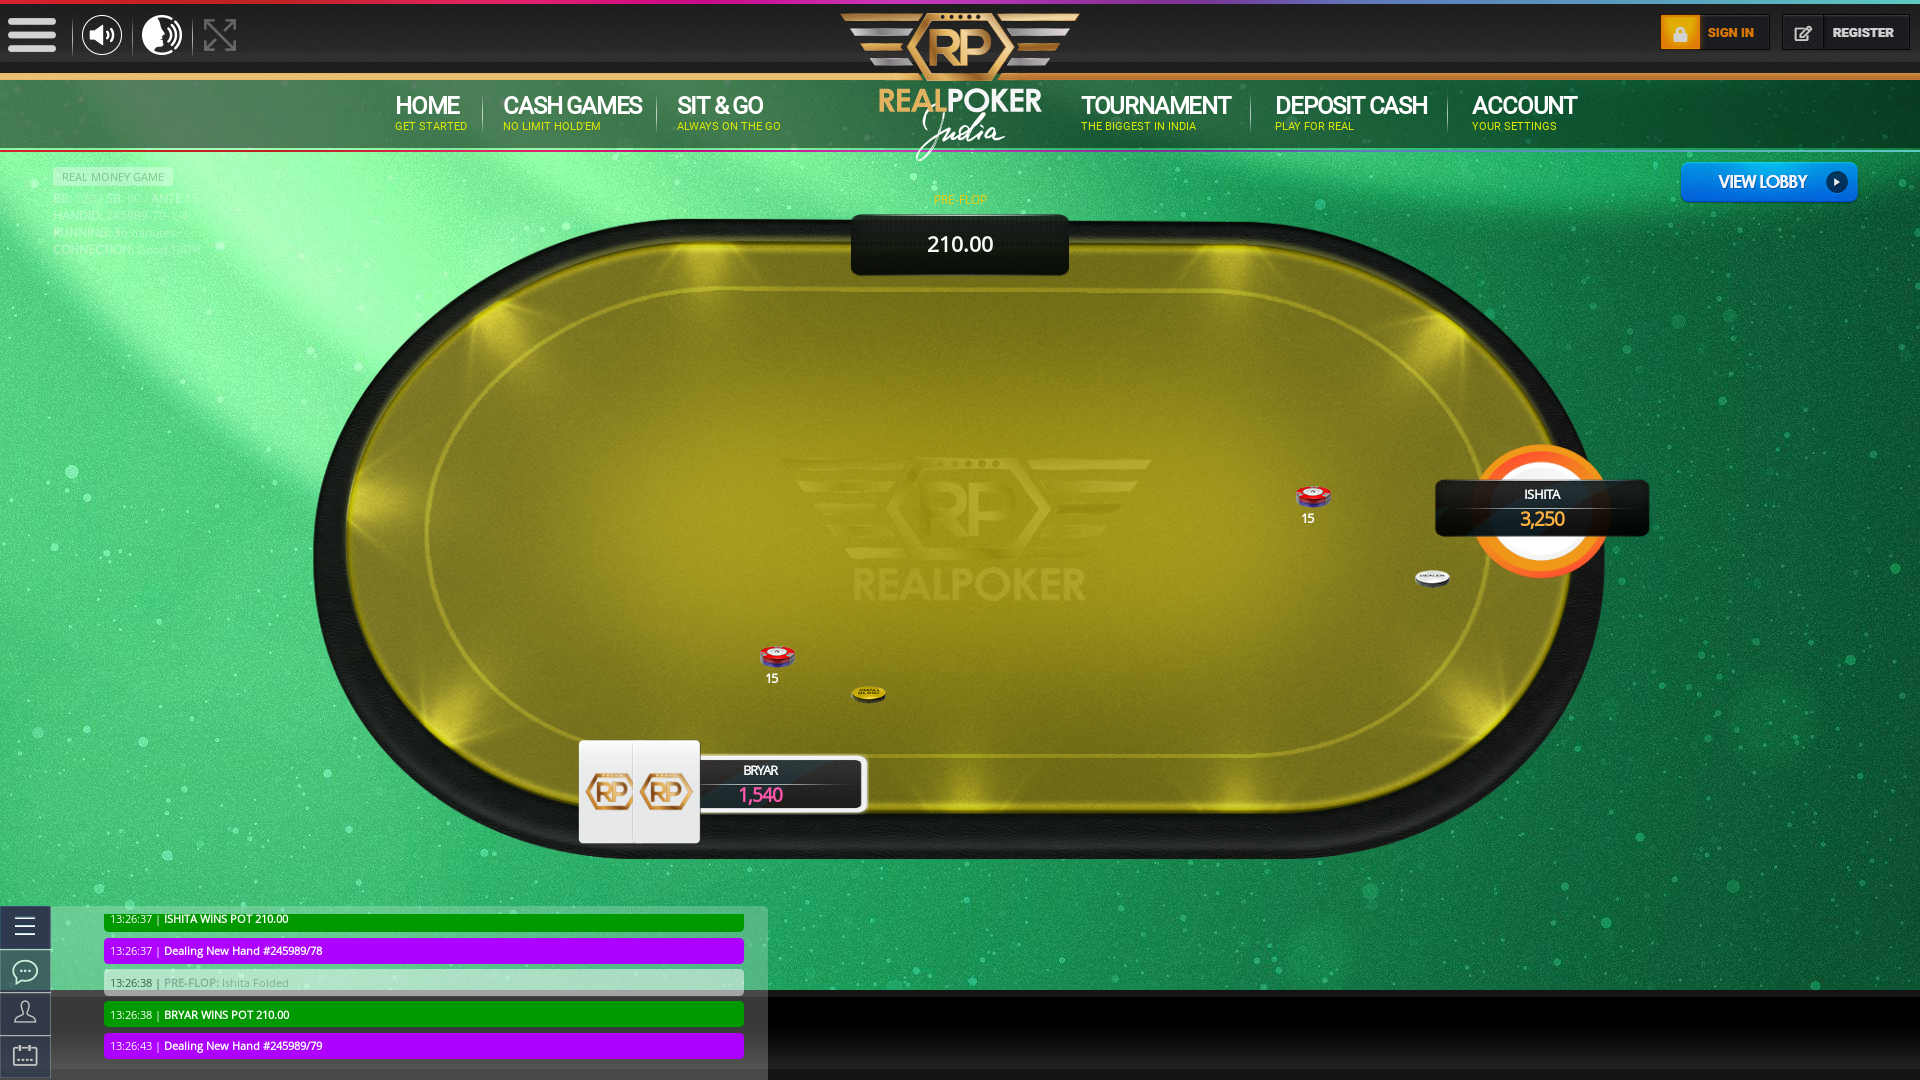 Real poker 10 player table in the 35th minute of the match